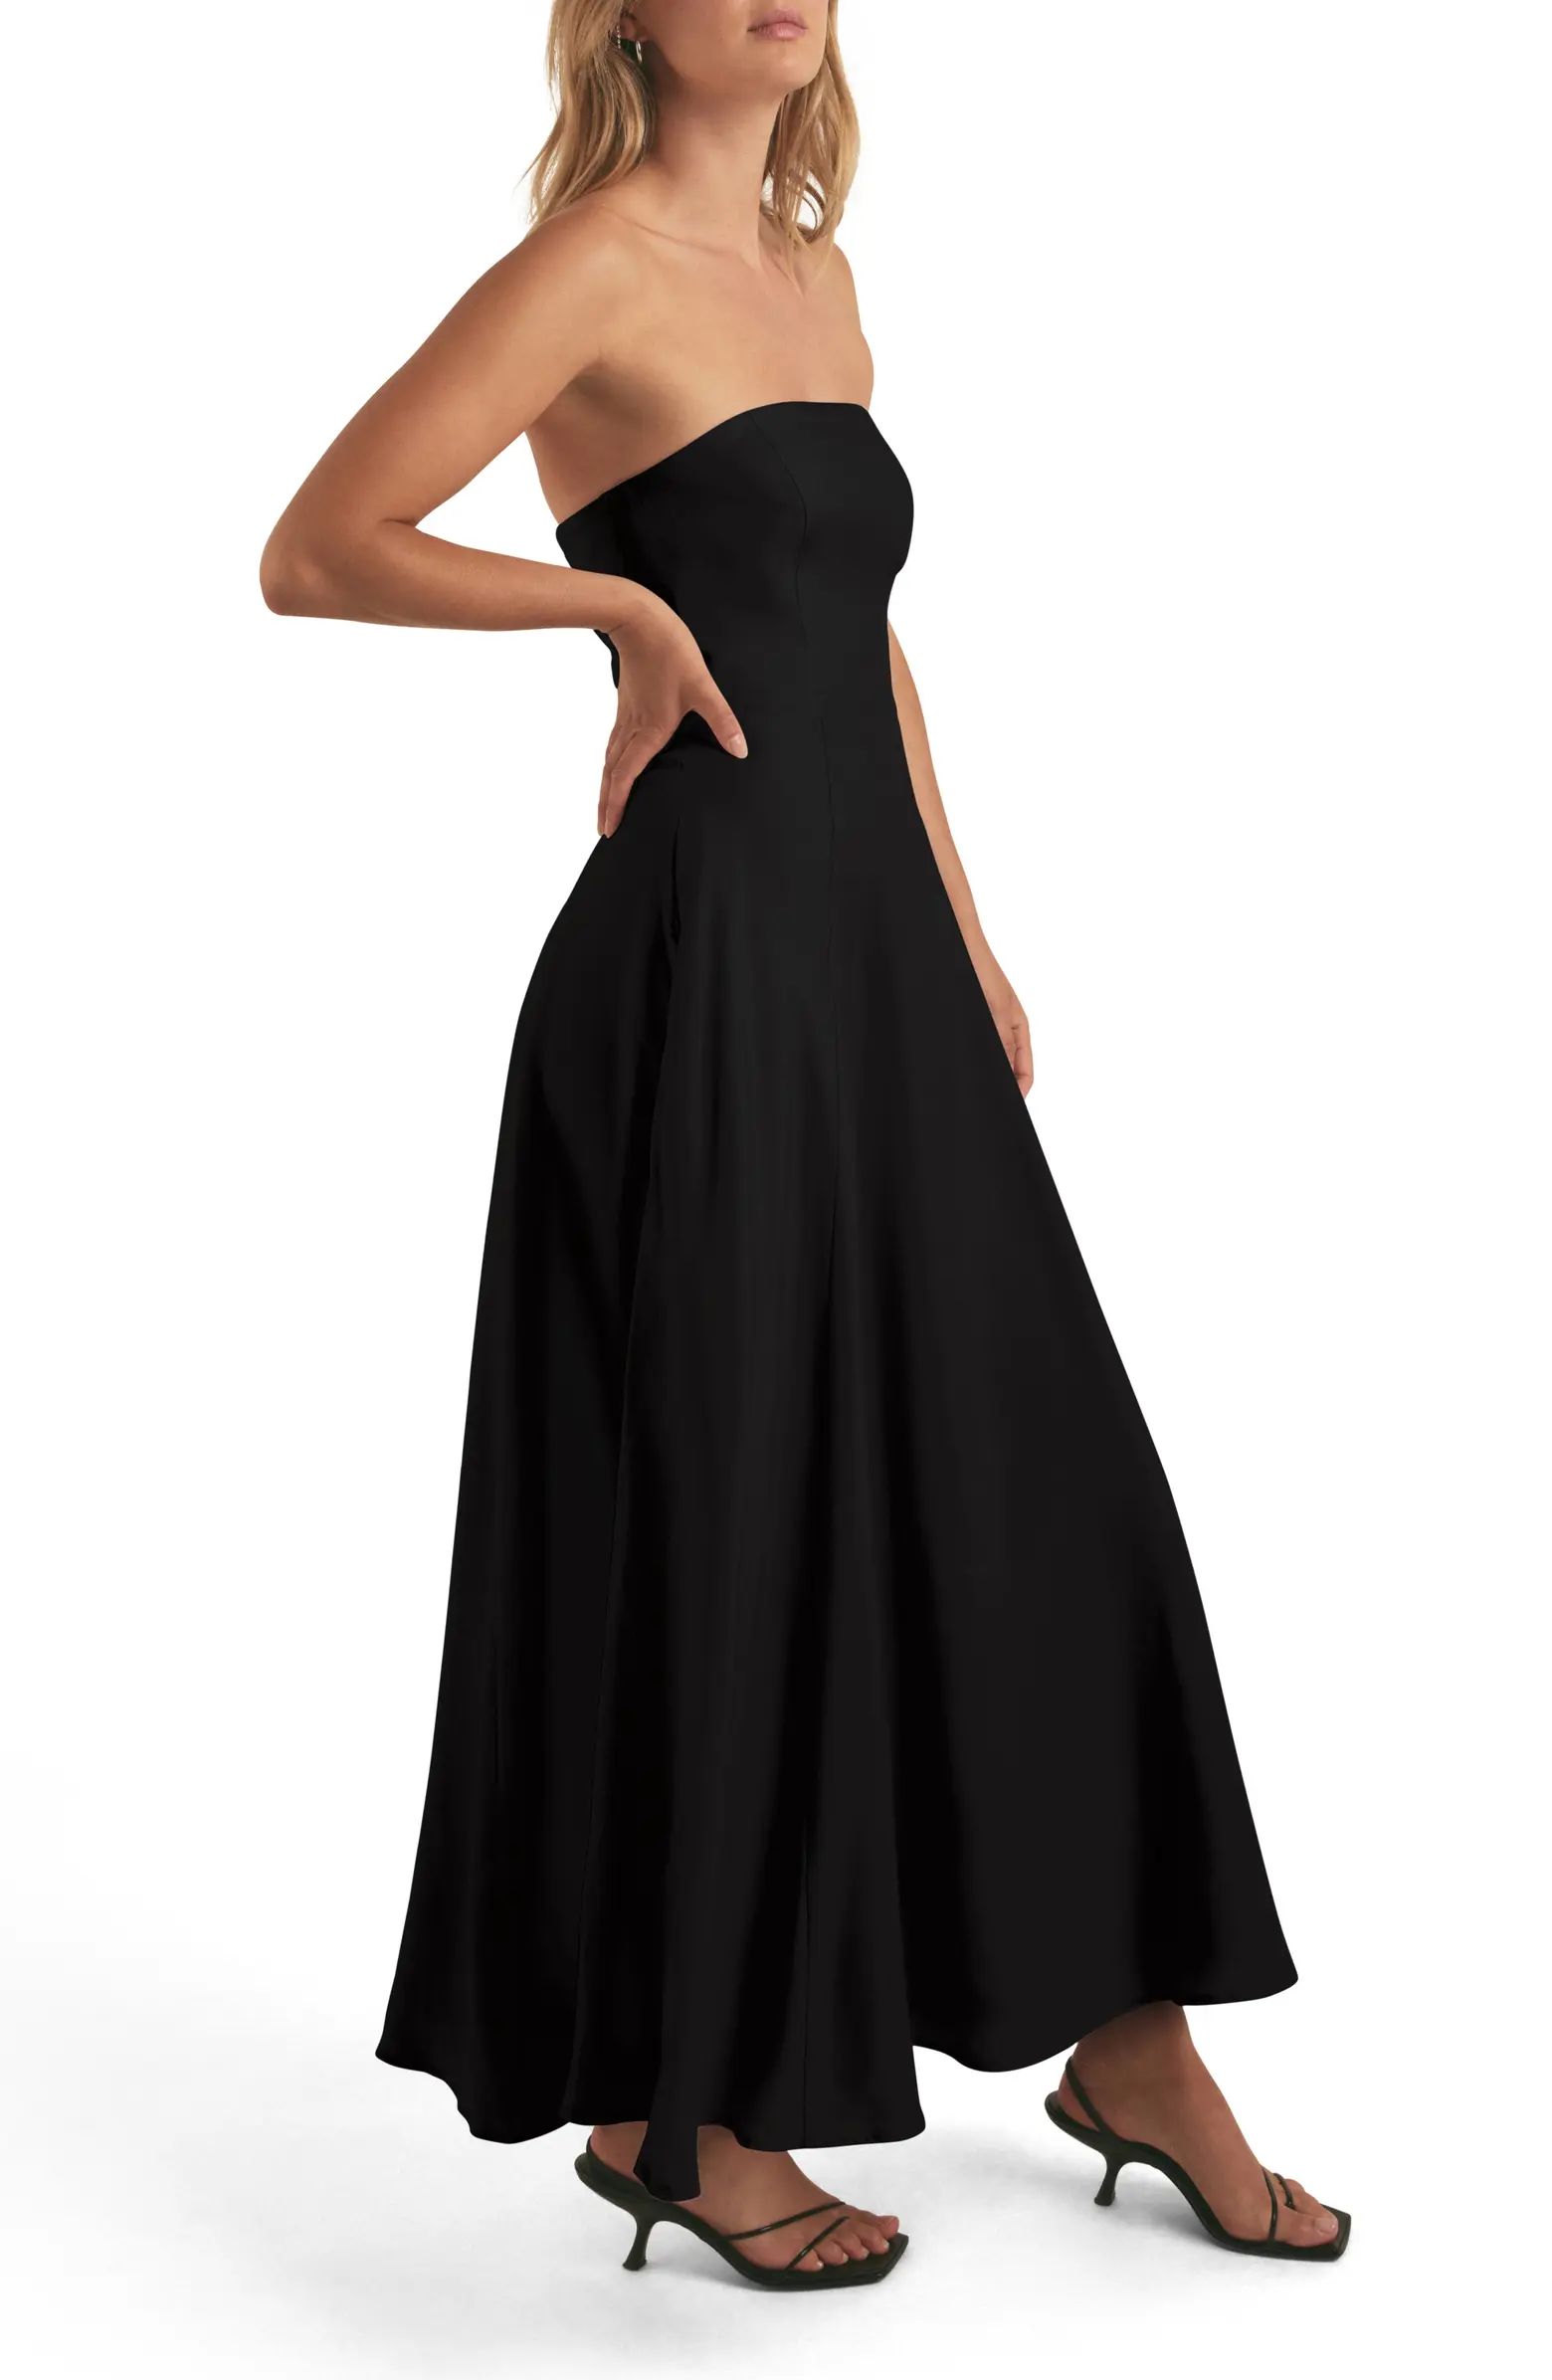 The Favorite Strapless Maxi Dress | Nordstrom